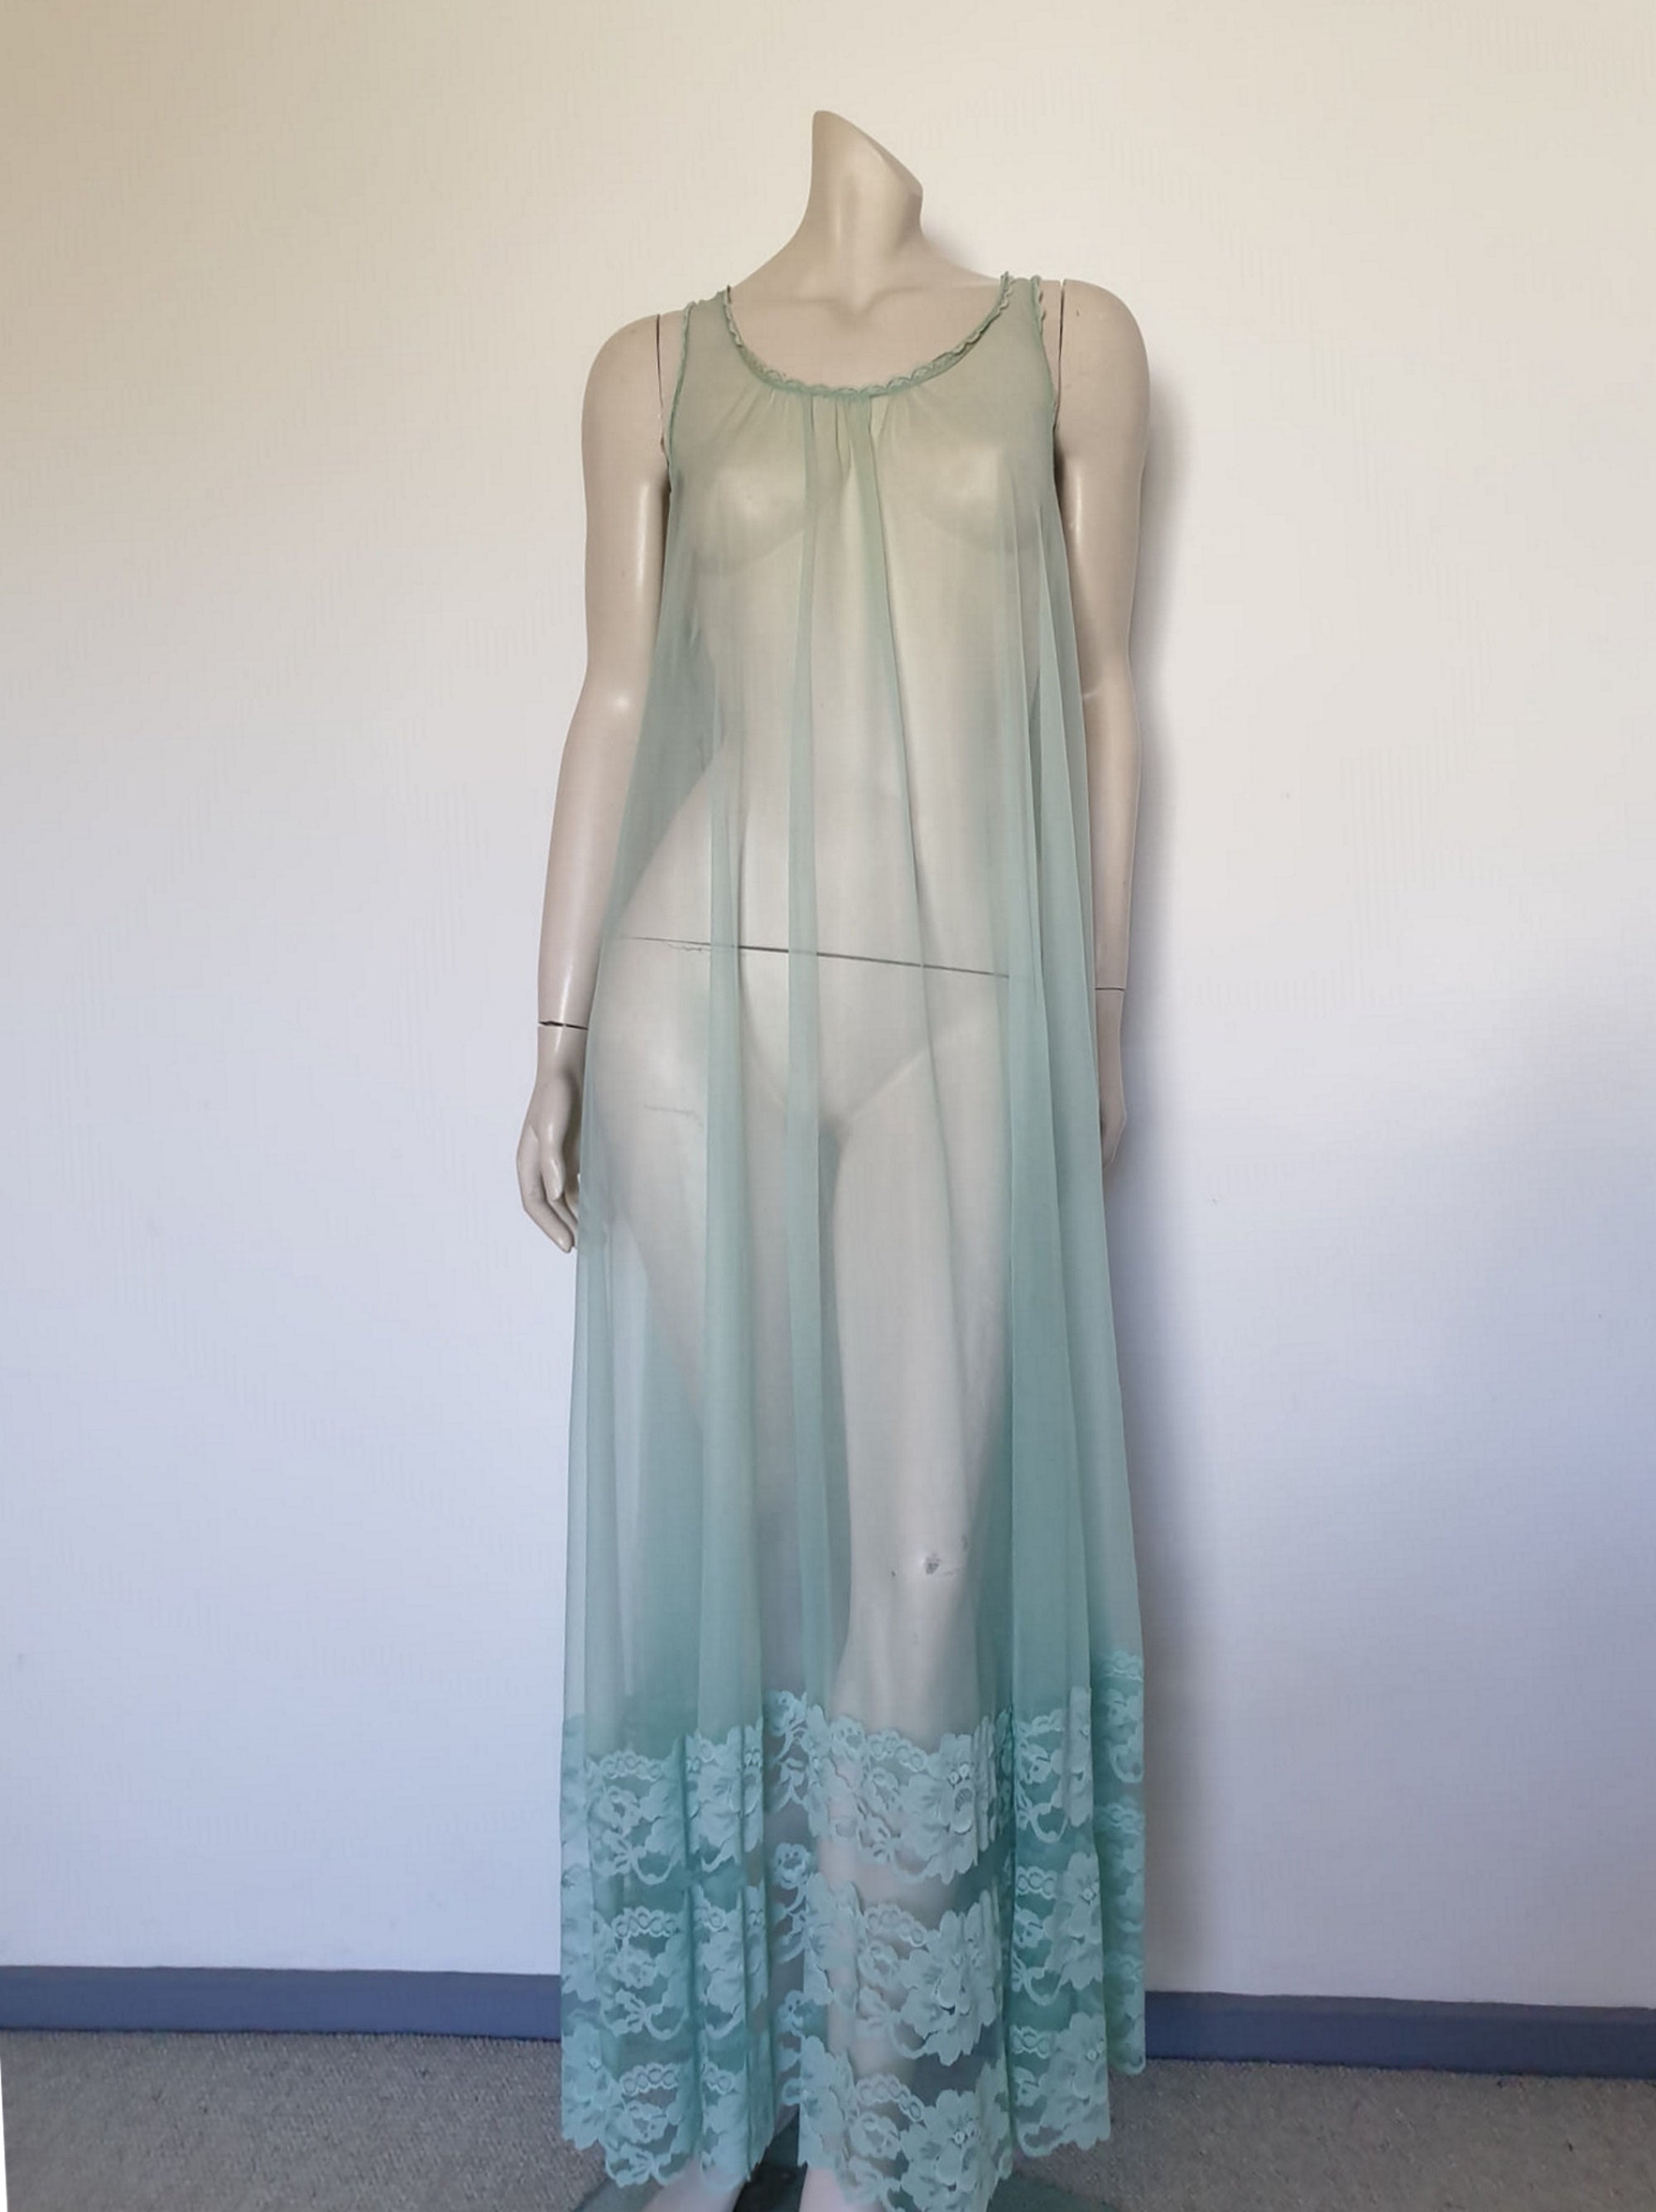 1960s 1970s vintage lingerie  sheer green negligee nightgown 